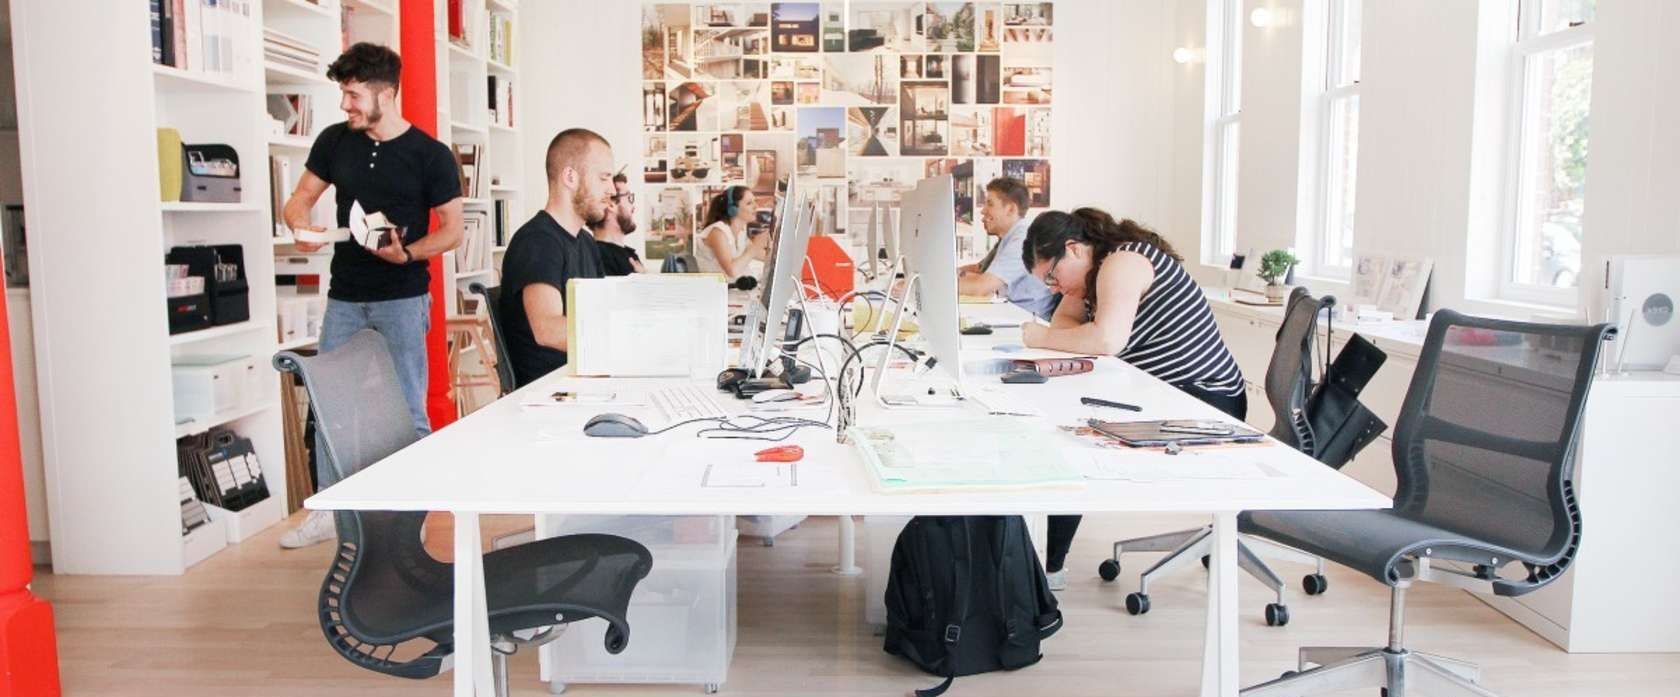 architects and design professionals working in an office environment